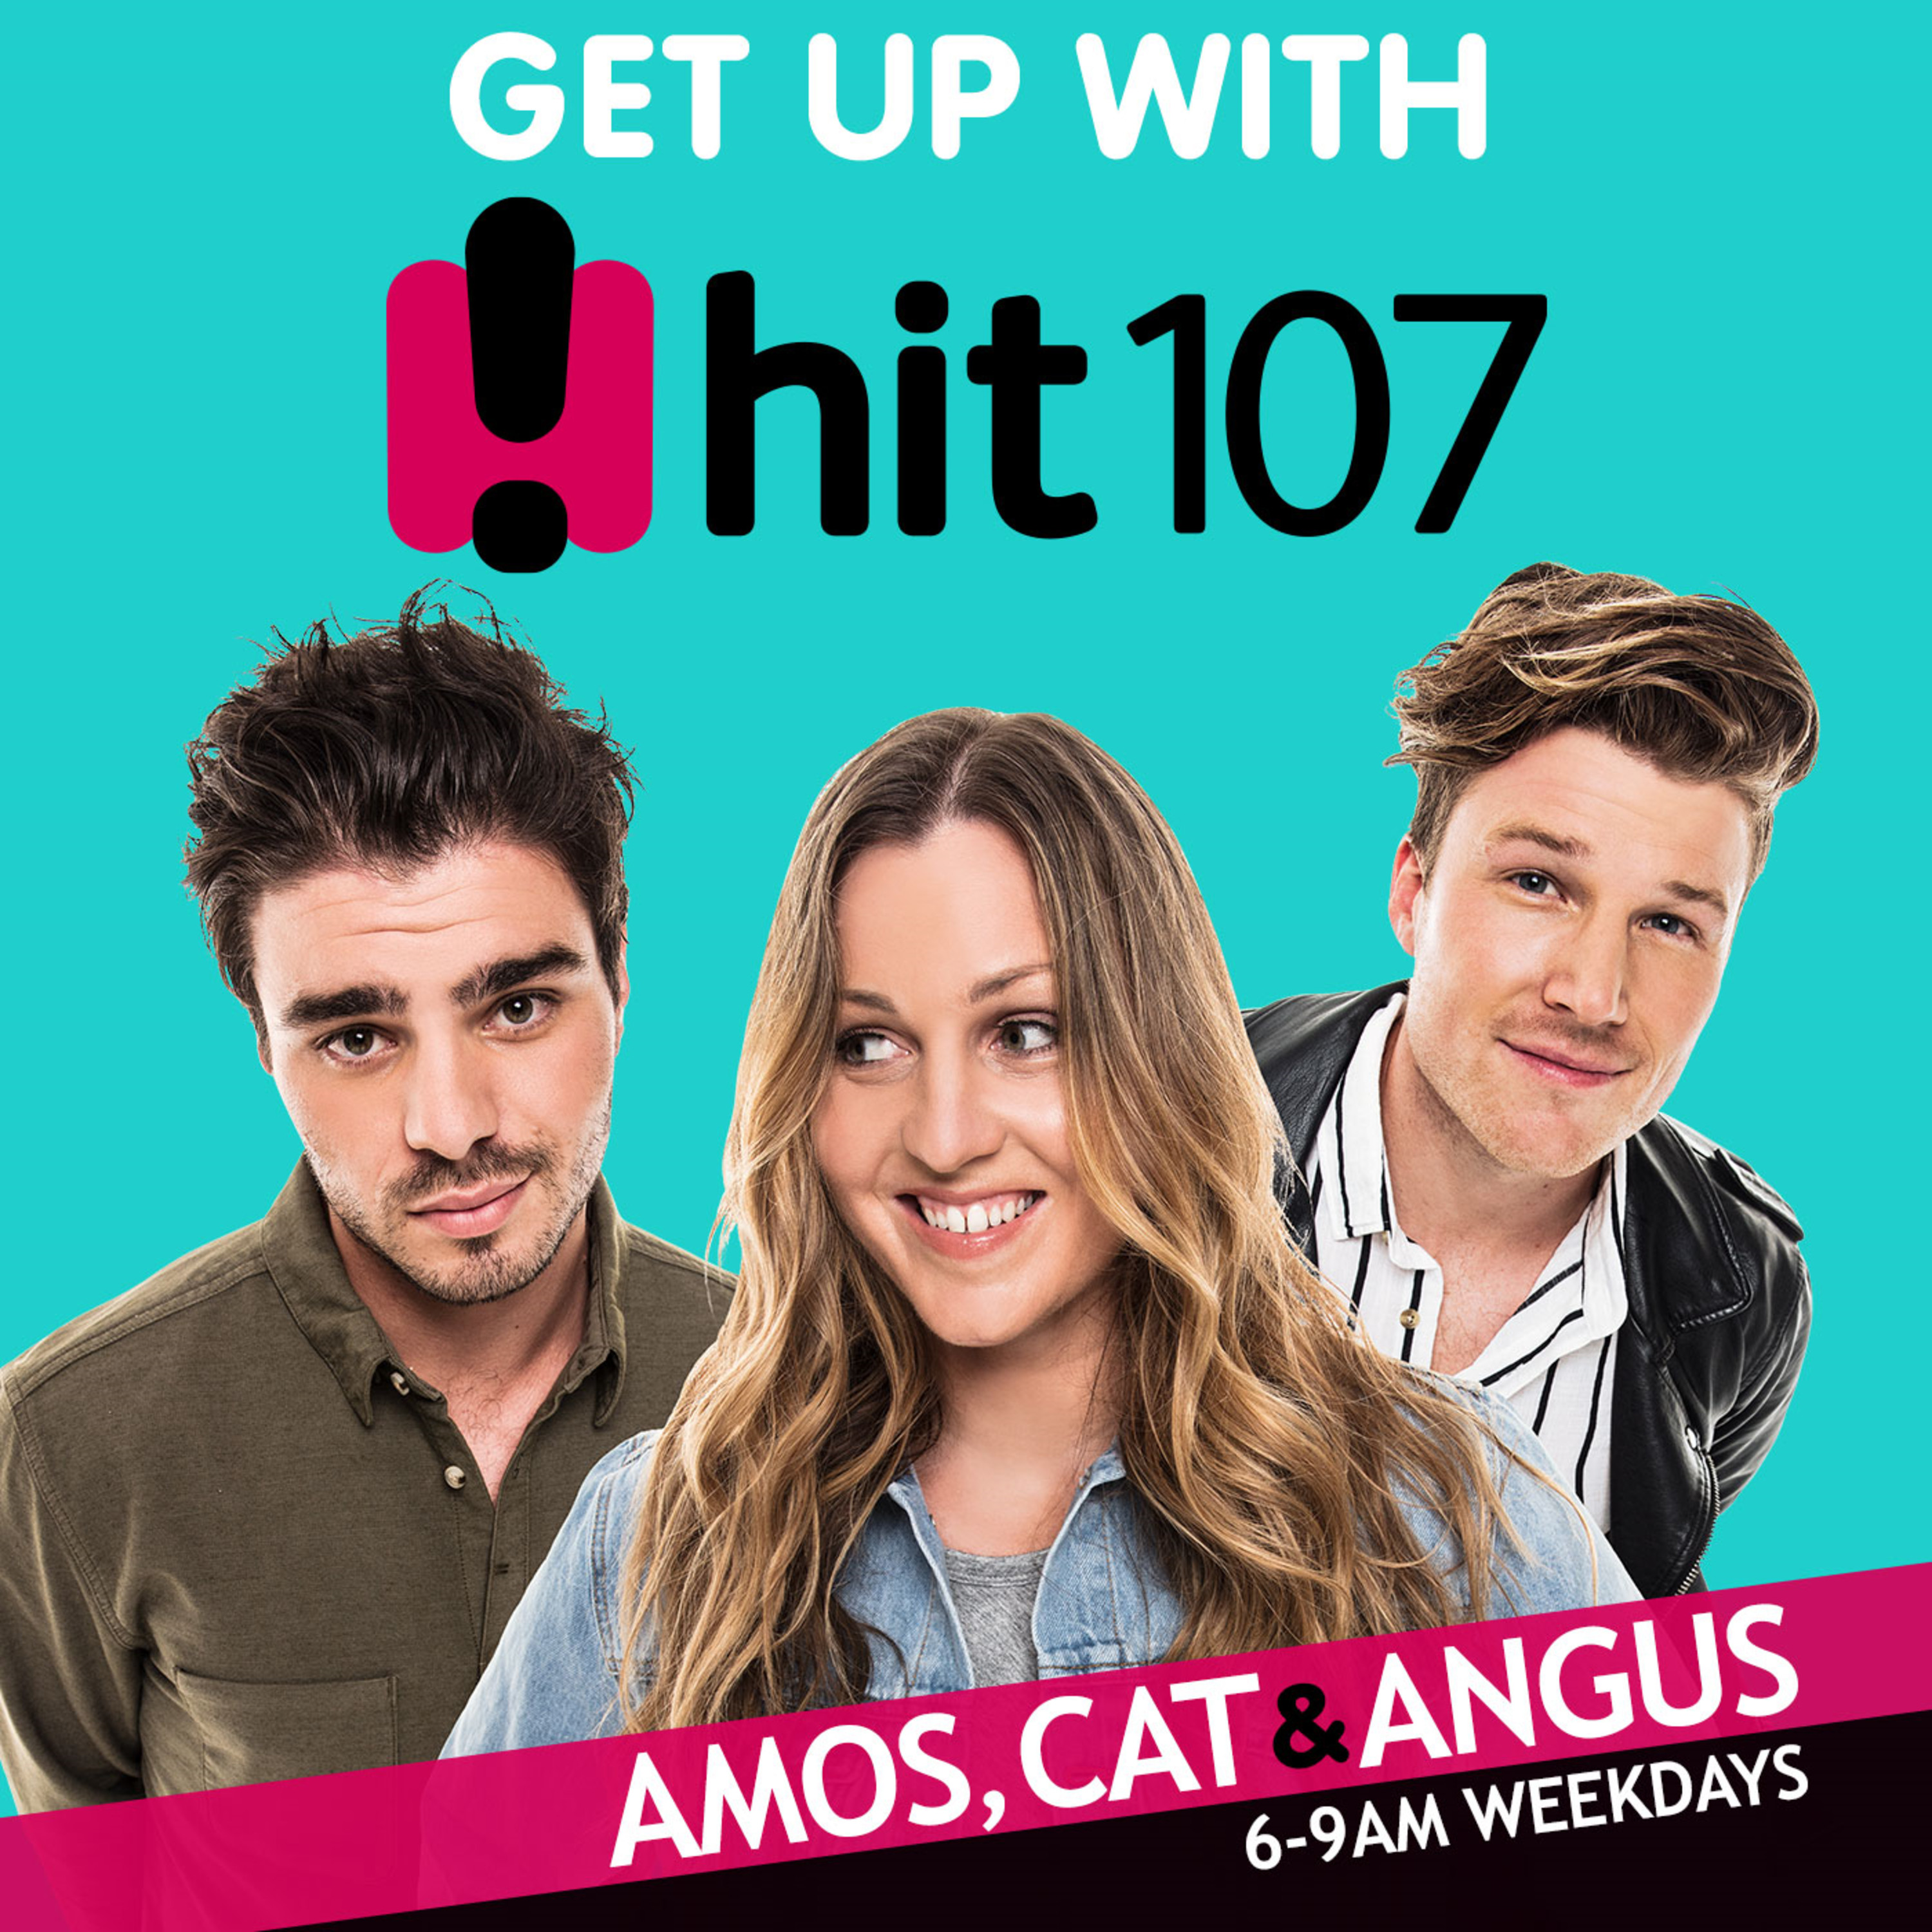 Amos, Cat & Angus Catch Up - hit107 Adelaide - Amos Gill, Cat Lynch & Angus O'Loughlin